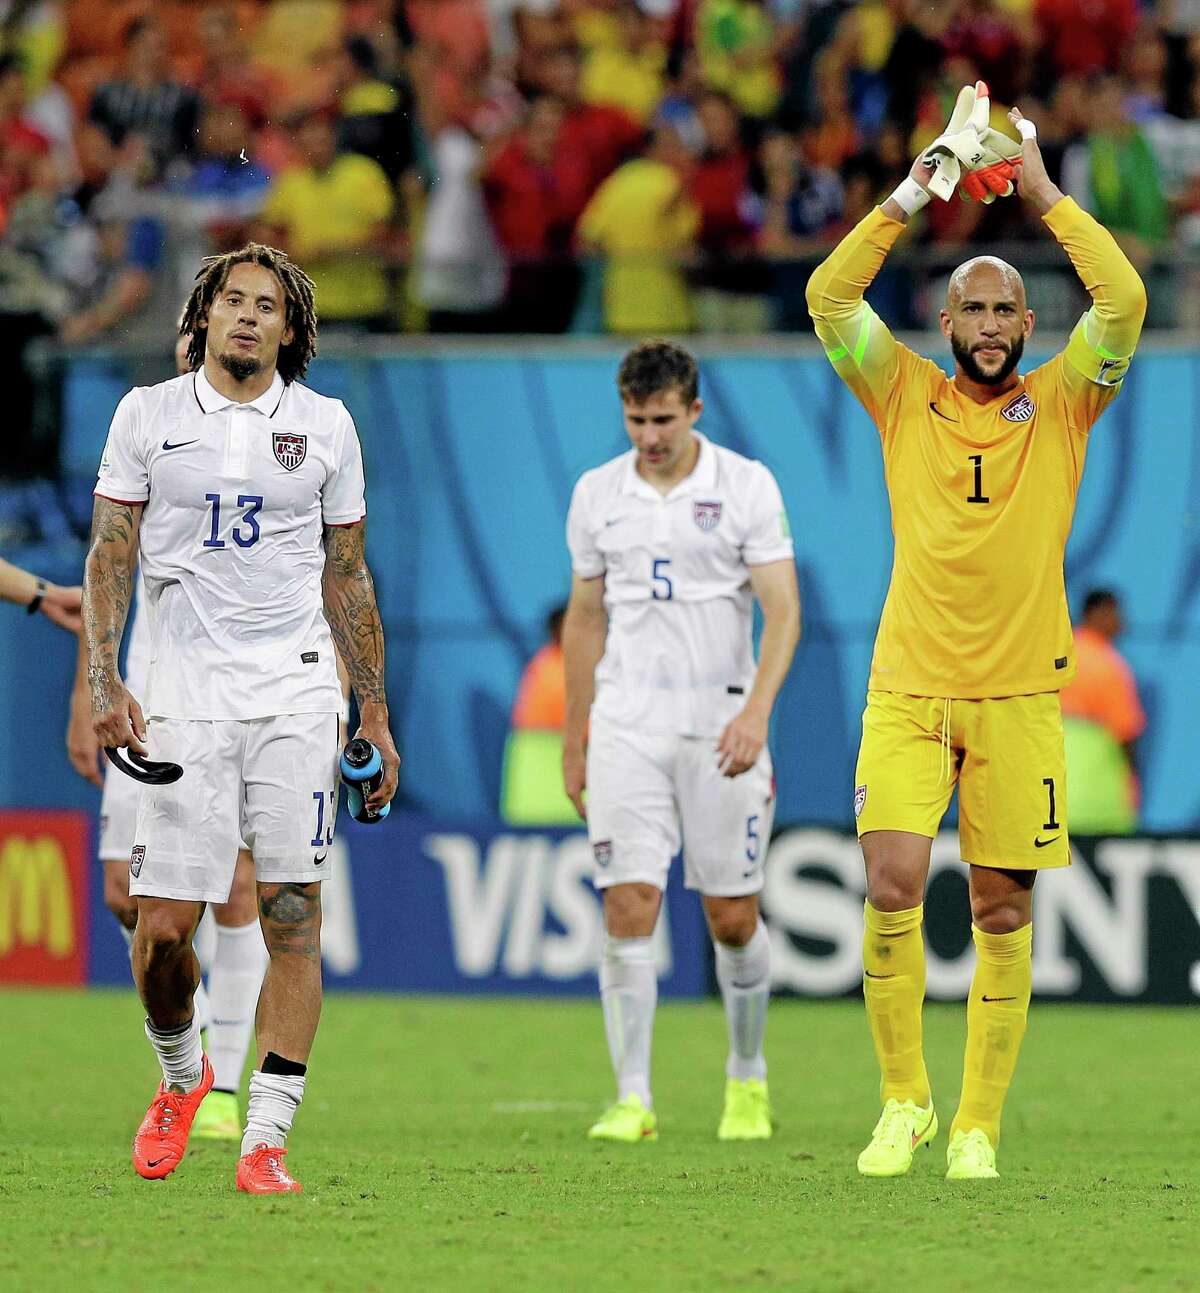 United States’ goalkeeper Tim Howard and United States’ Jermaine Jones walk off the pitch following their 2-2 draw with Portugal on Sunday.